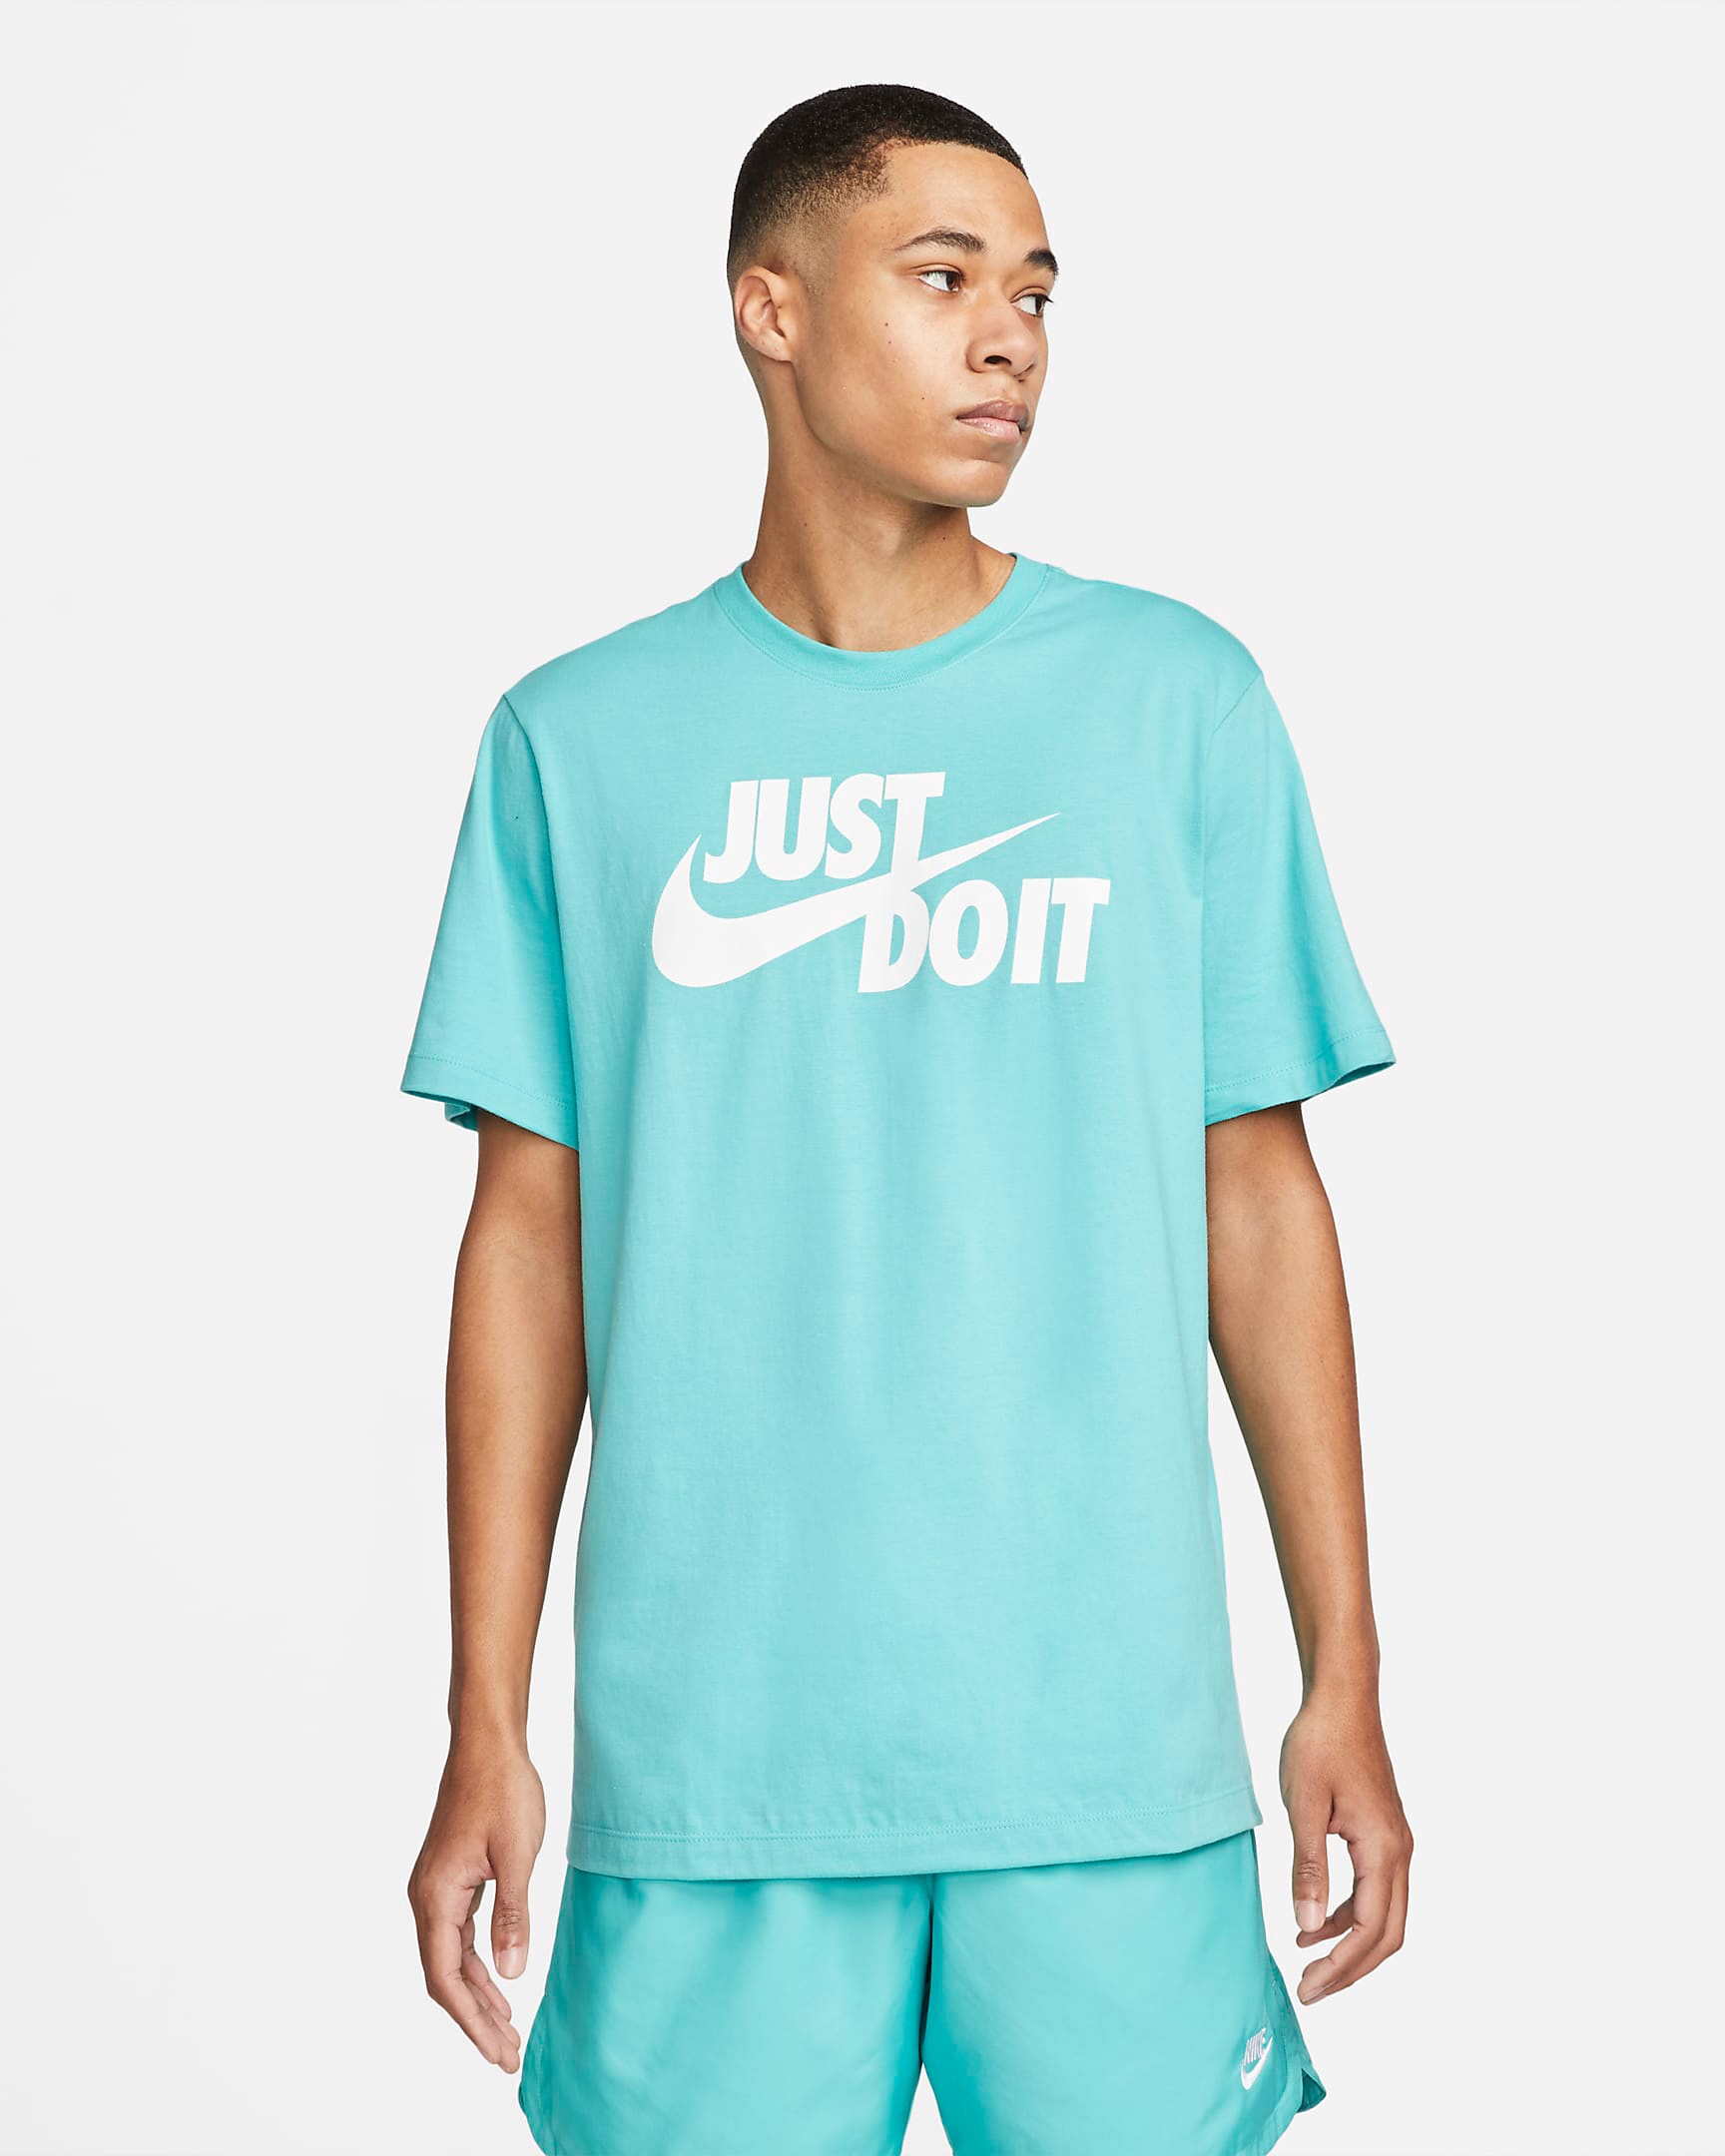 nike-washed-teal-jdi-just-do-it-t-shirt